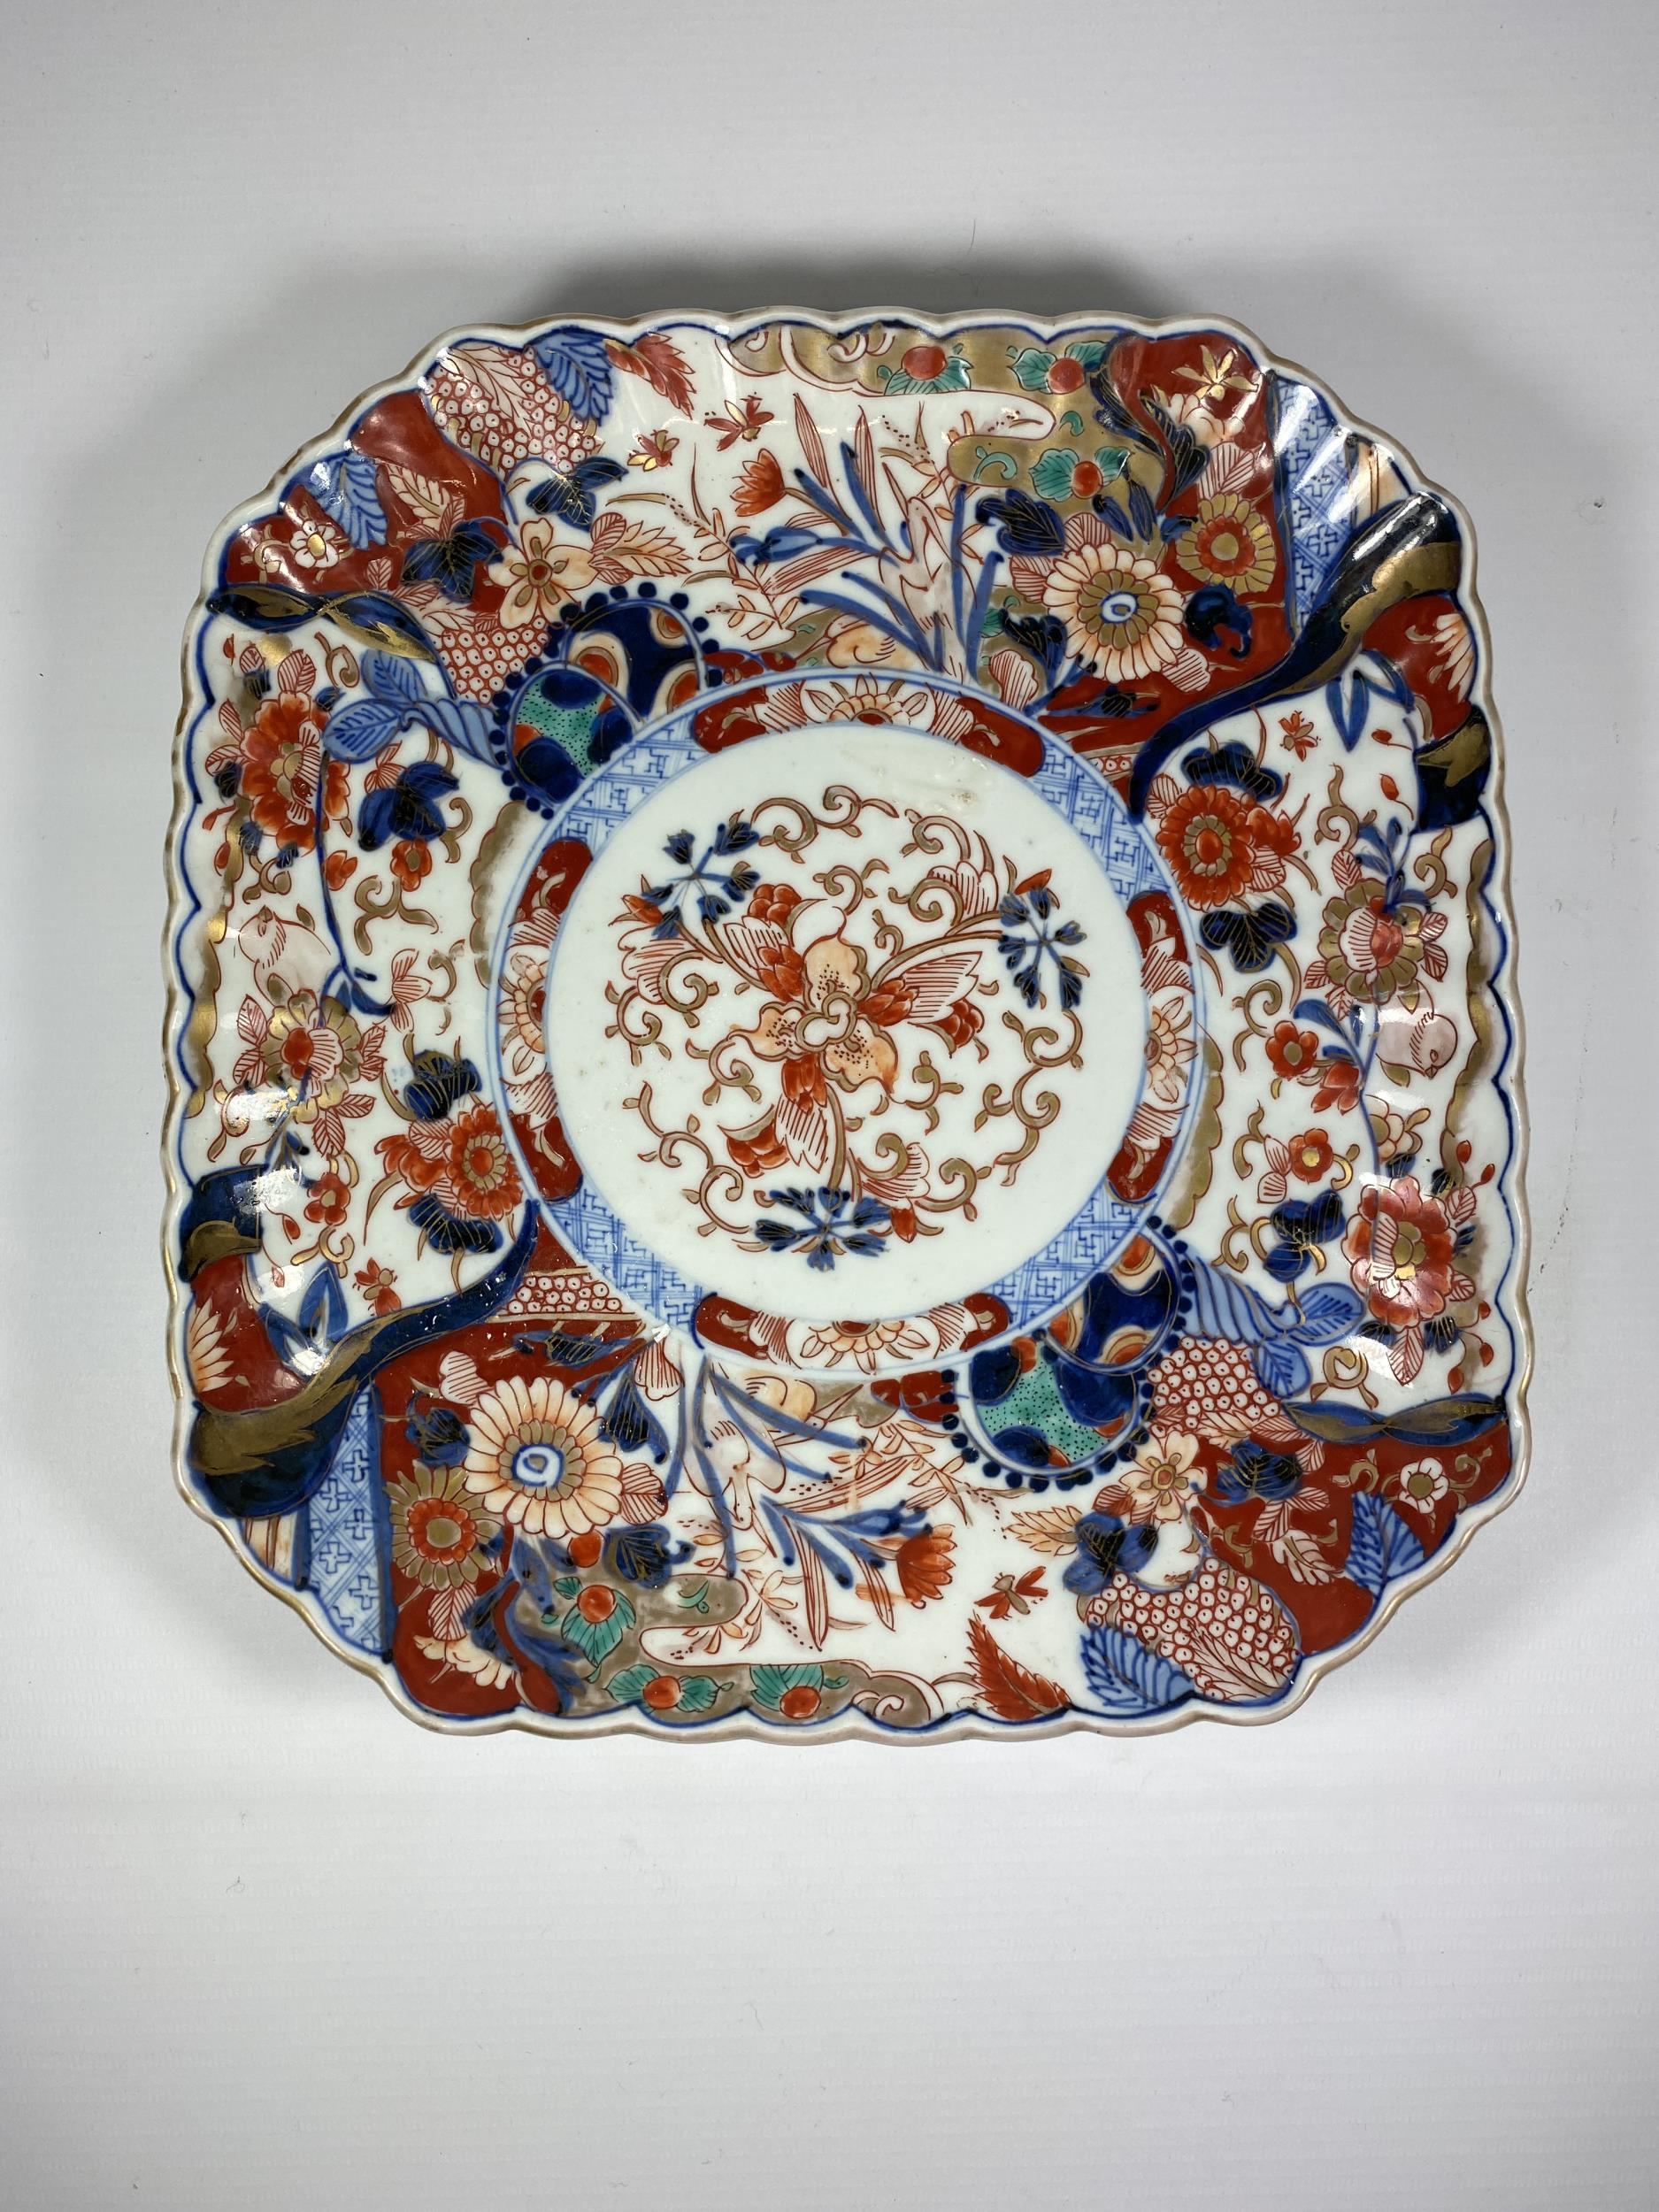 AN UNUSUAL SQUARE FORM JAPANESE MEIJI PERIOD (1868-1912) IMARI HAND PAINTED CHARGER 27.5CM